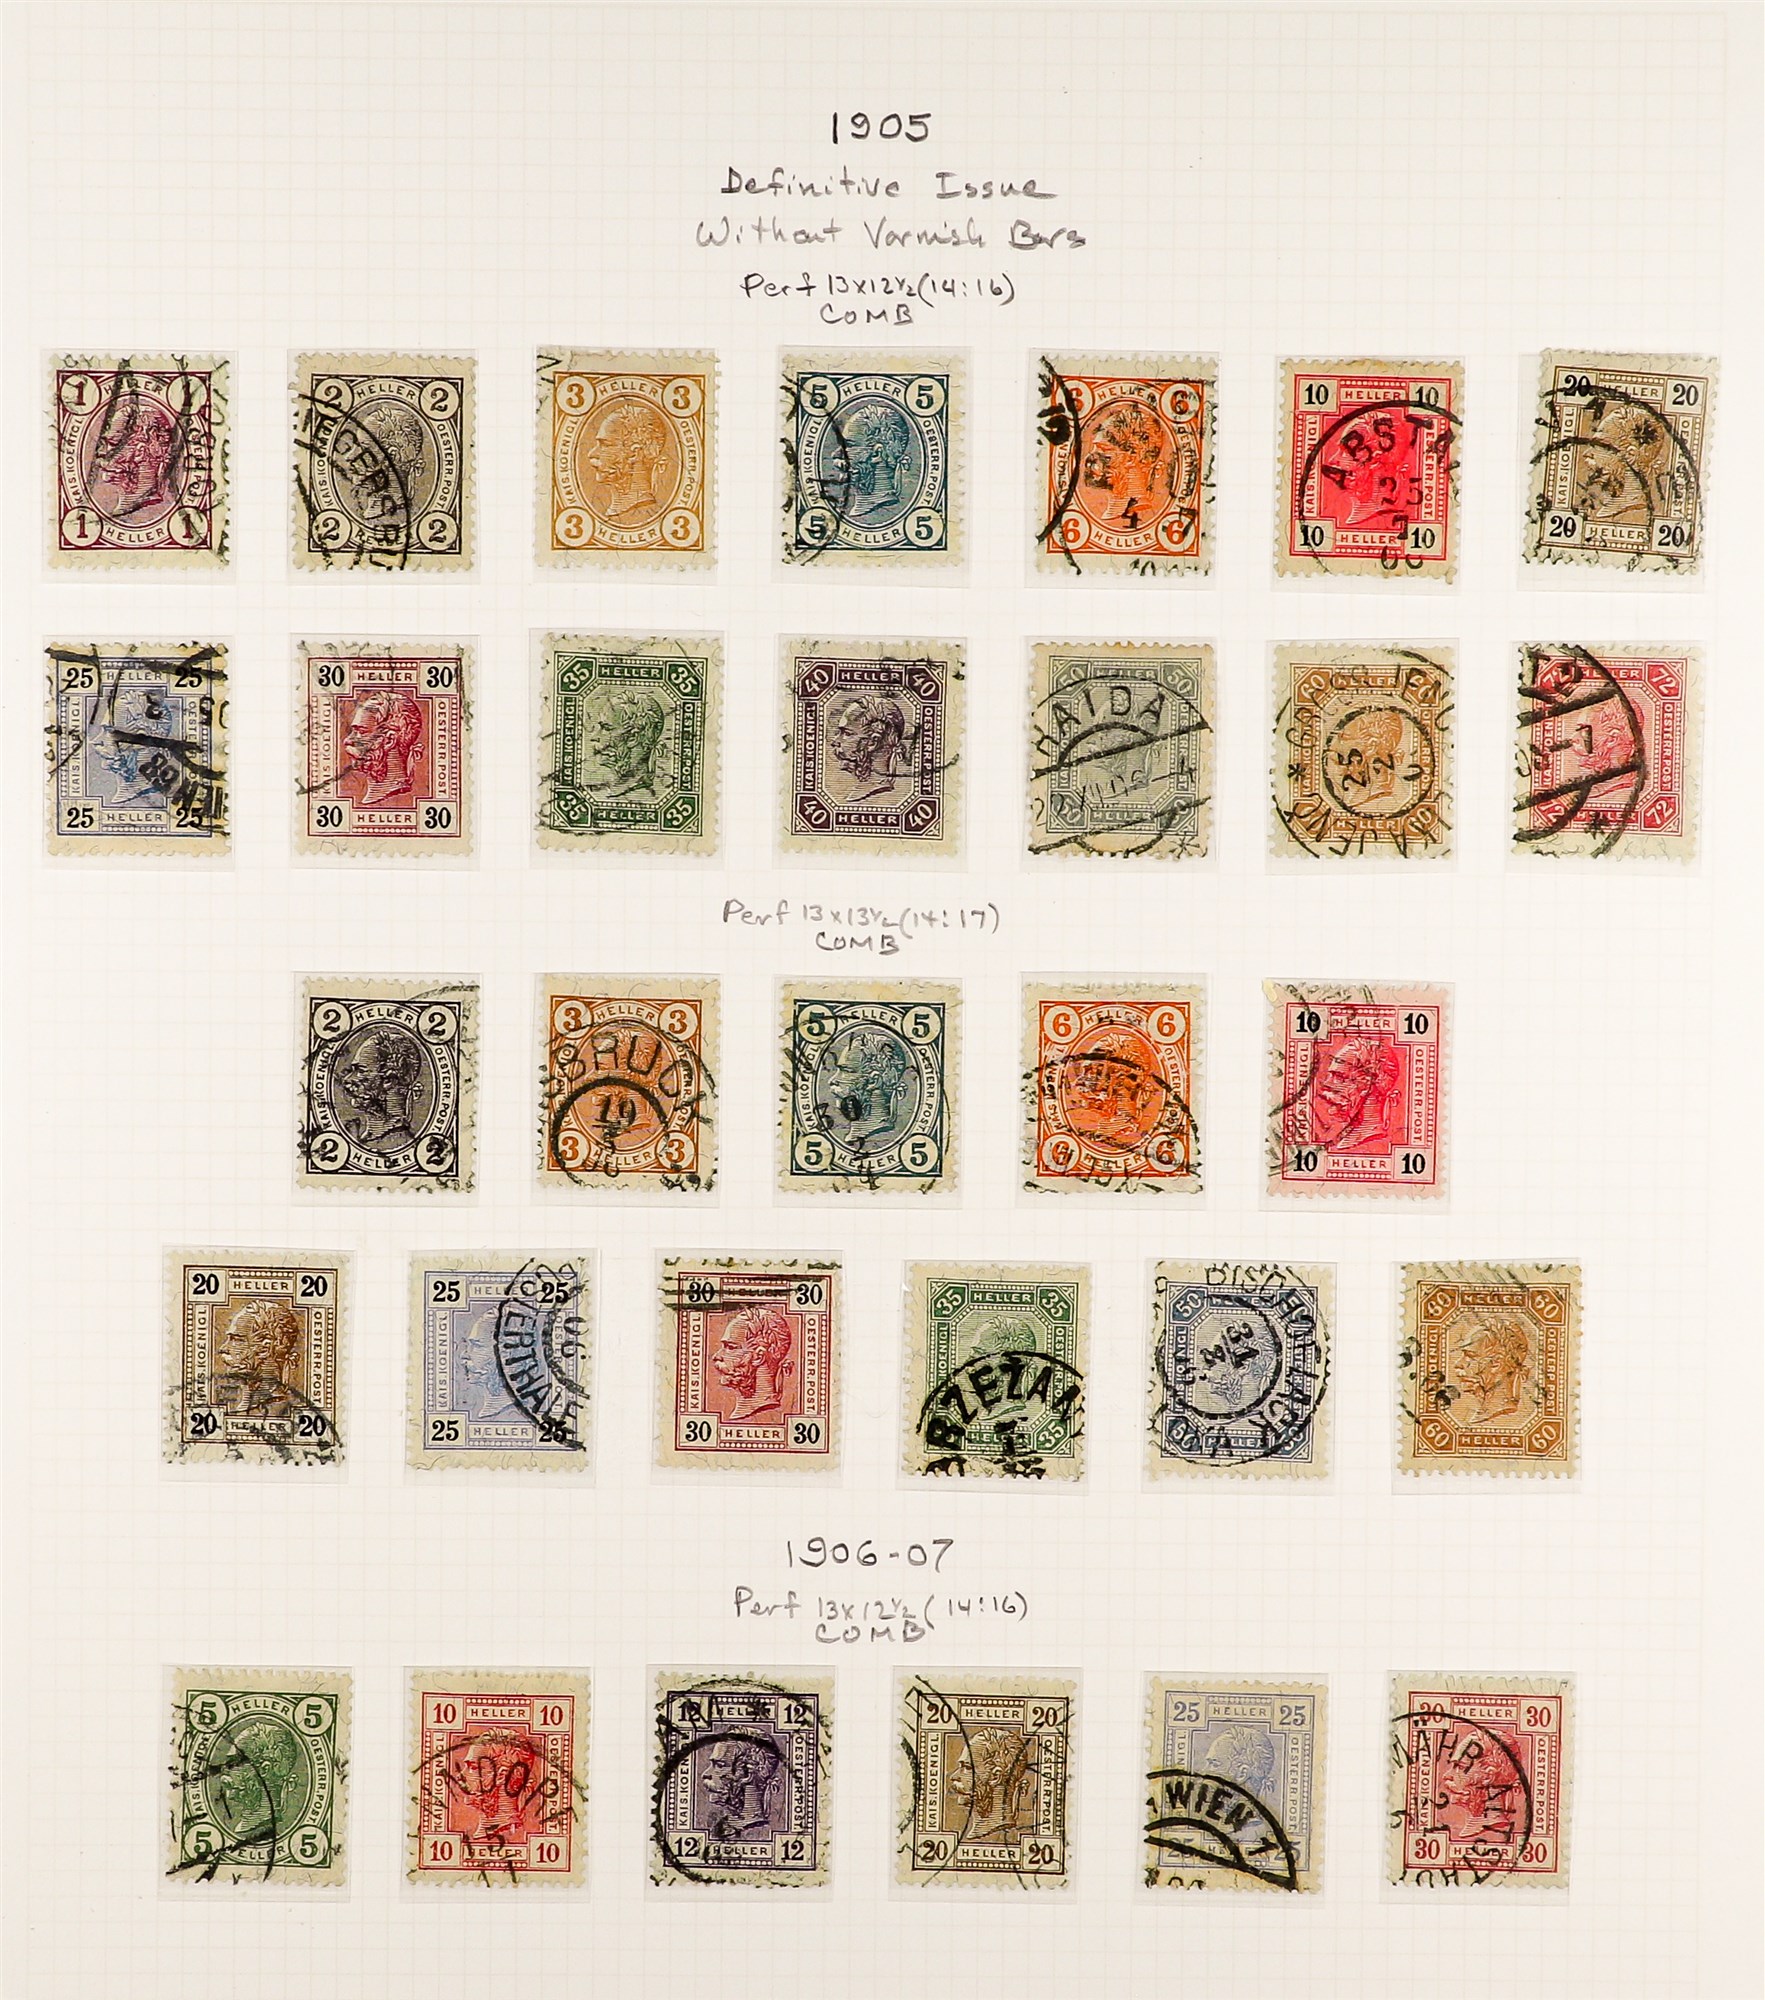 AUSTRIA 1890 - 1907 FRANZ JOSEF DEFINITIVES collection of over 300 stamps on album pages, semi- - Image 13 of 13